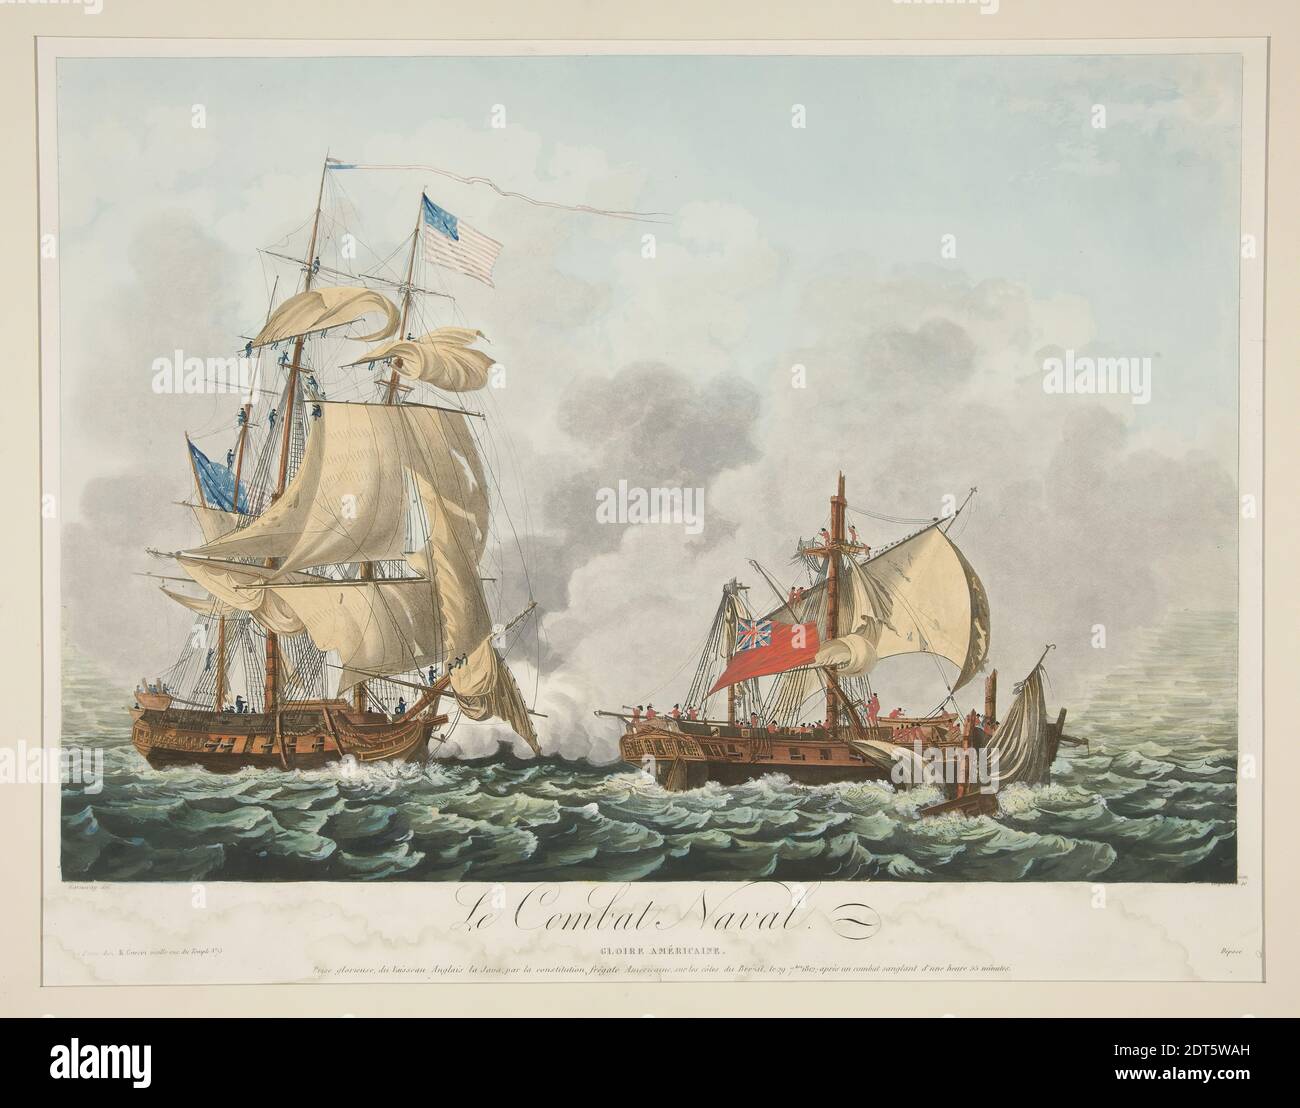 After: Ambroise Louis Garneray, French, 1783–1857, Le Combat Naval Constitution (first state), Aquatint, by Coquerel, sheet: 43 × 54.5 cm (16 15/16 × 21 7/16 in.), Made in France, French, 19th century, Works on Paper - Prints Stock Photo